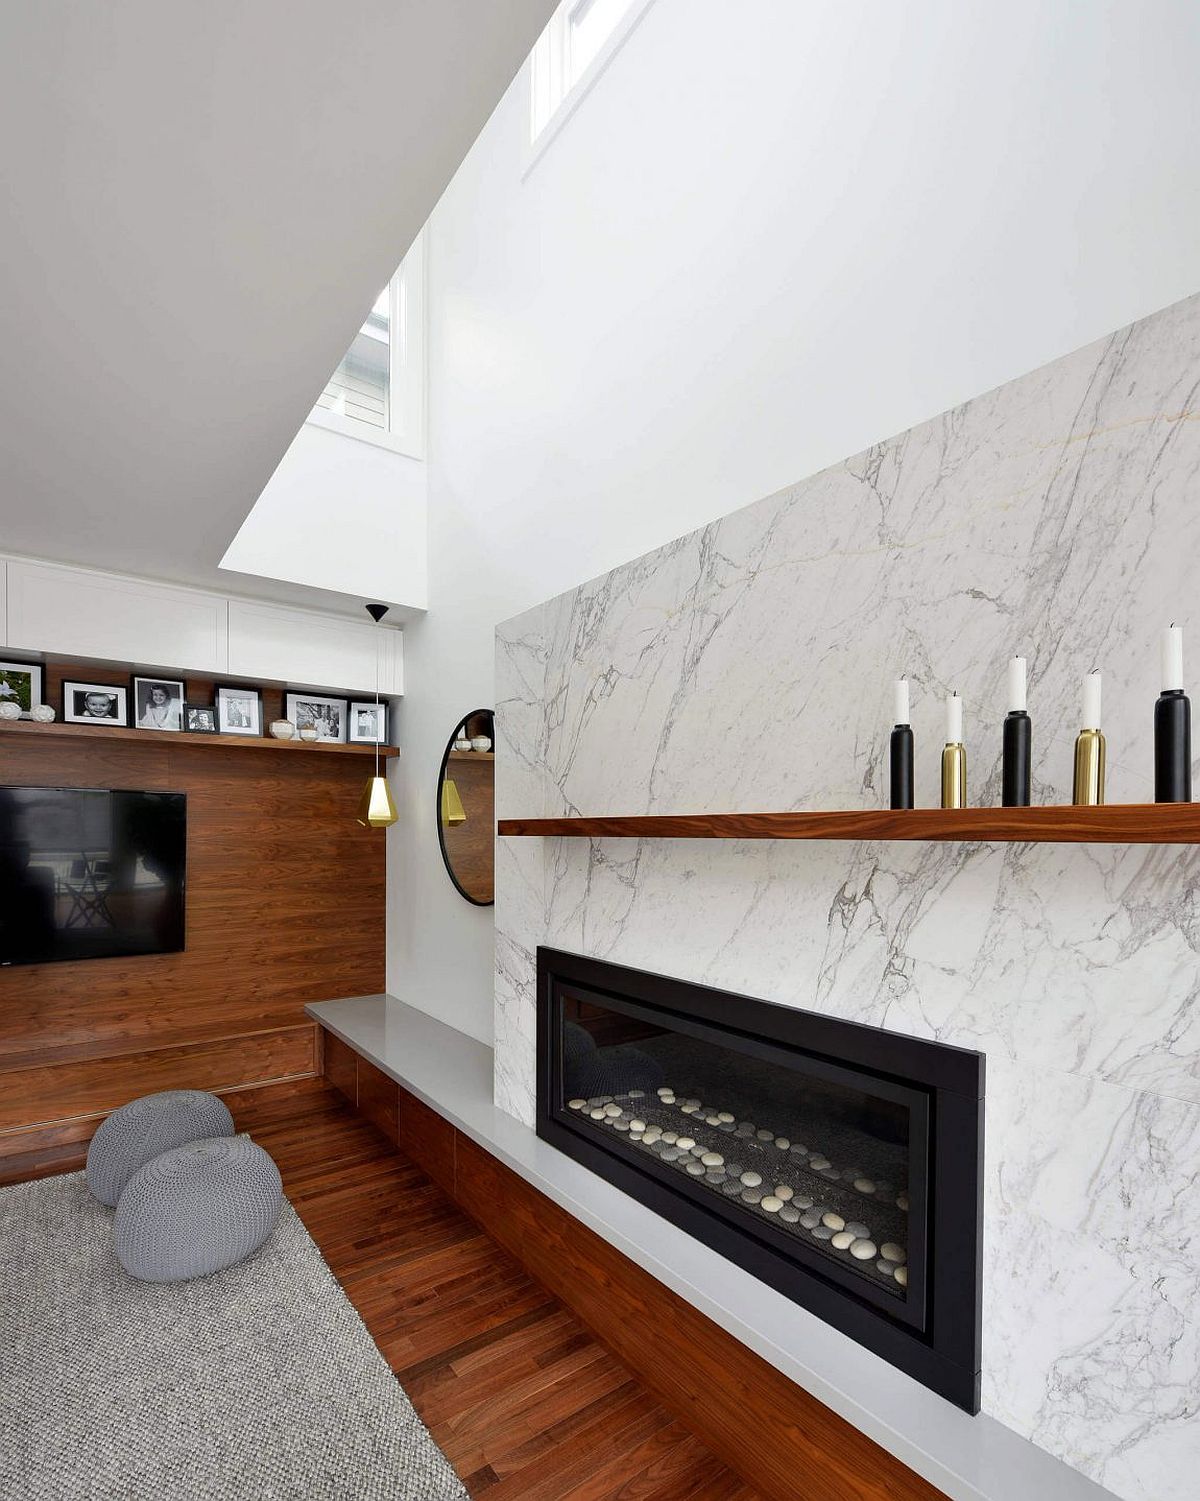 Marble and wood present contrasting textures